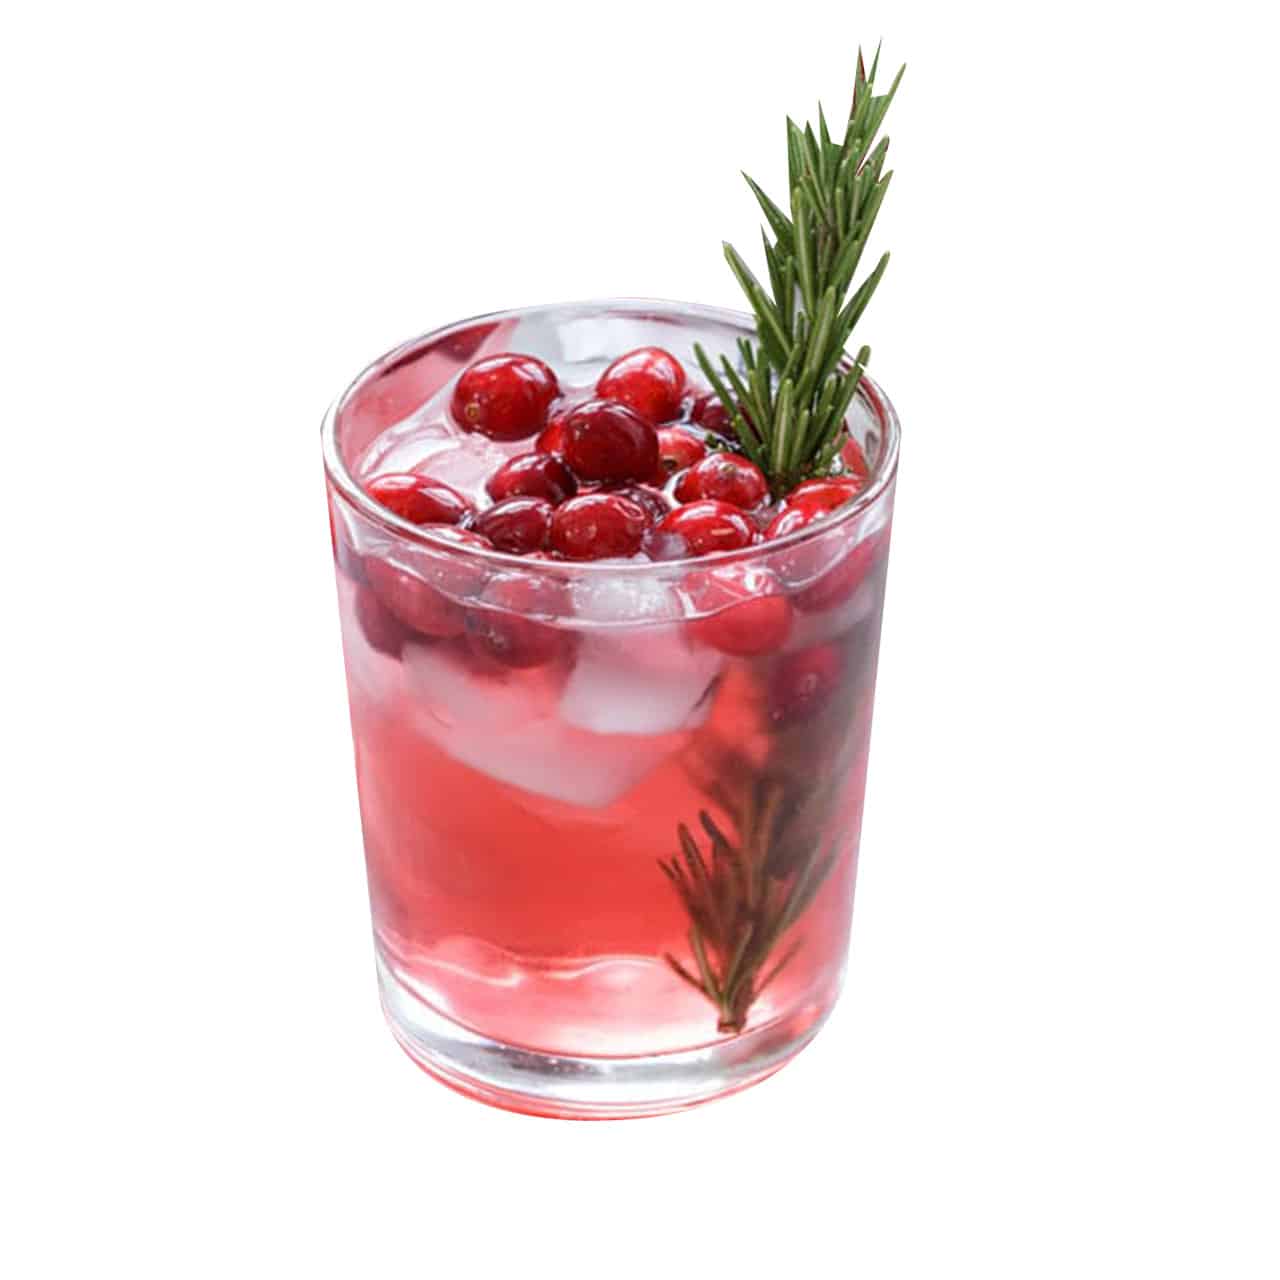 (Out of Season) Spiced Cranberry Gimlet - 1.5oz Gin, .75oz Cranberry Spiced Syrup, .75oz Lime Juice (Cranberries & Rosemary Not Included)